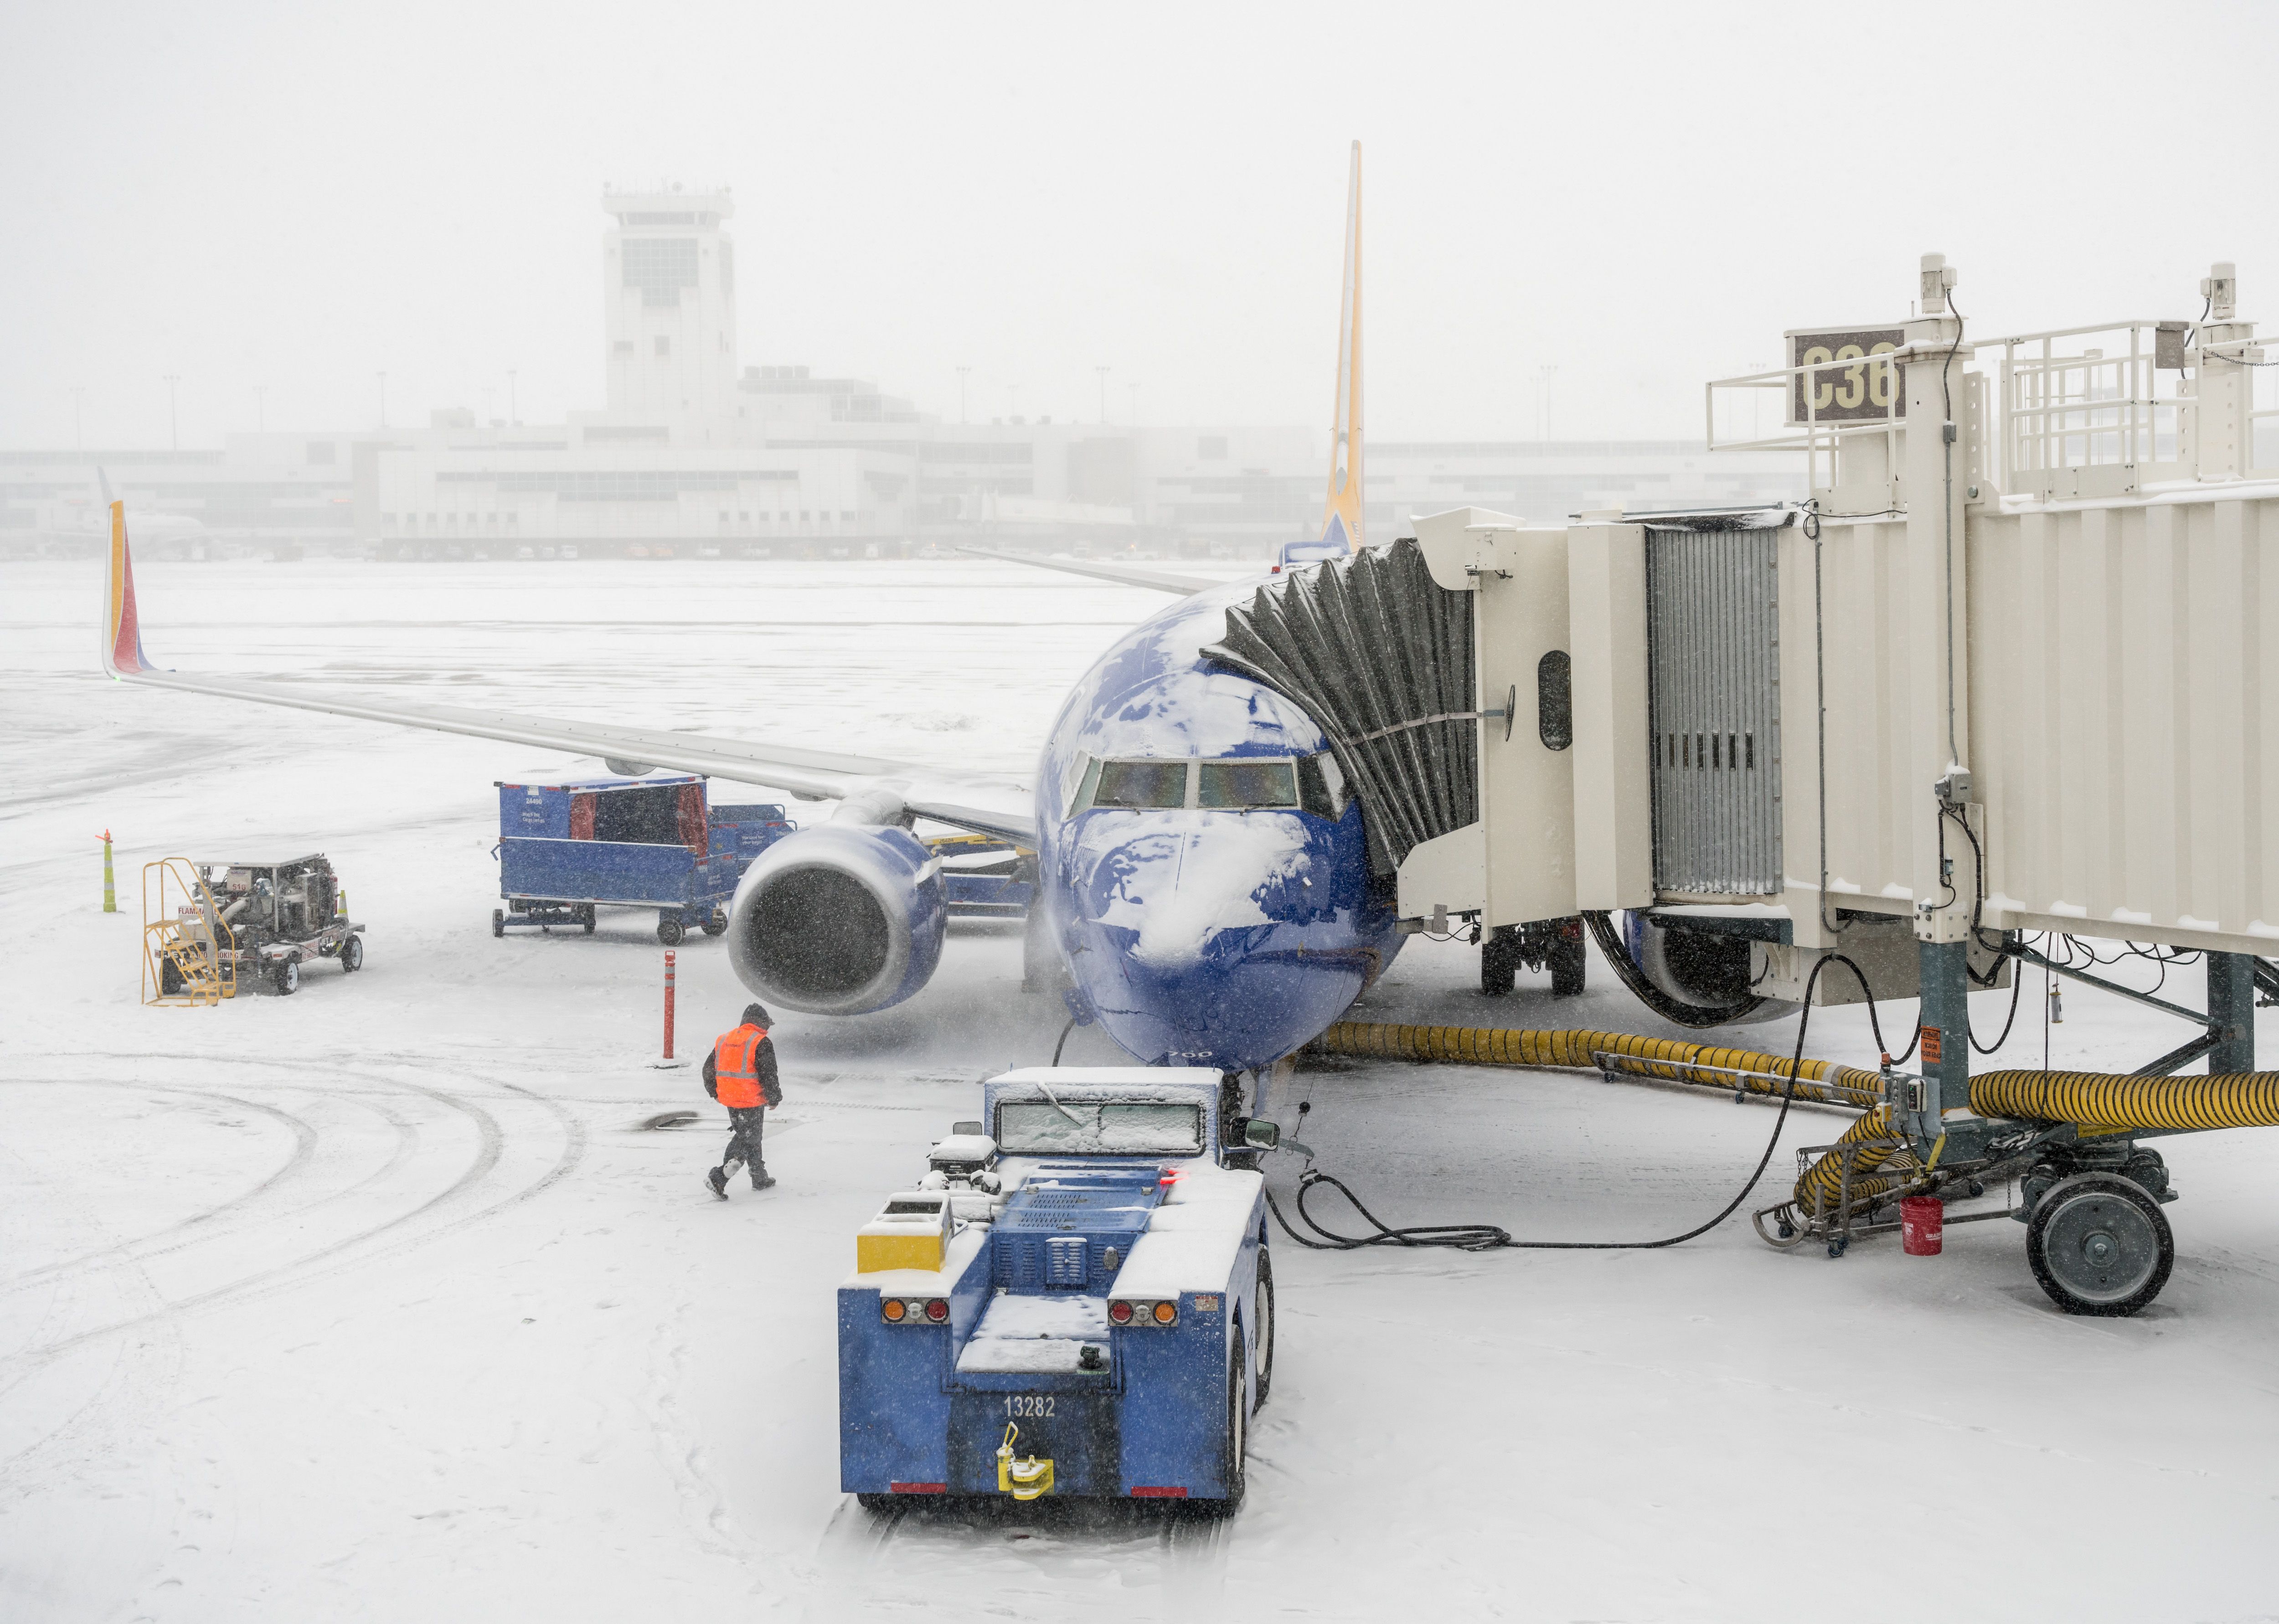 shutterstock_1305194401 - DENVER, COLORADO: JANUARY 24, 2019: Southwest planes being loaded at the jetway in snow storm